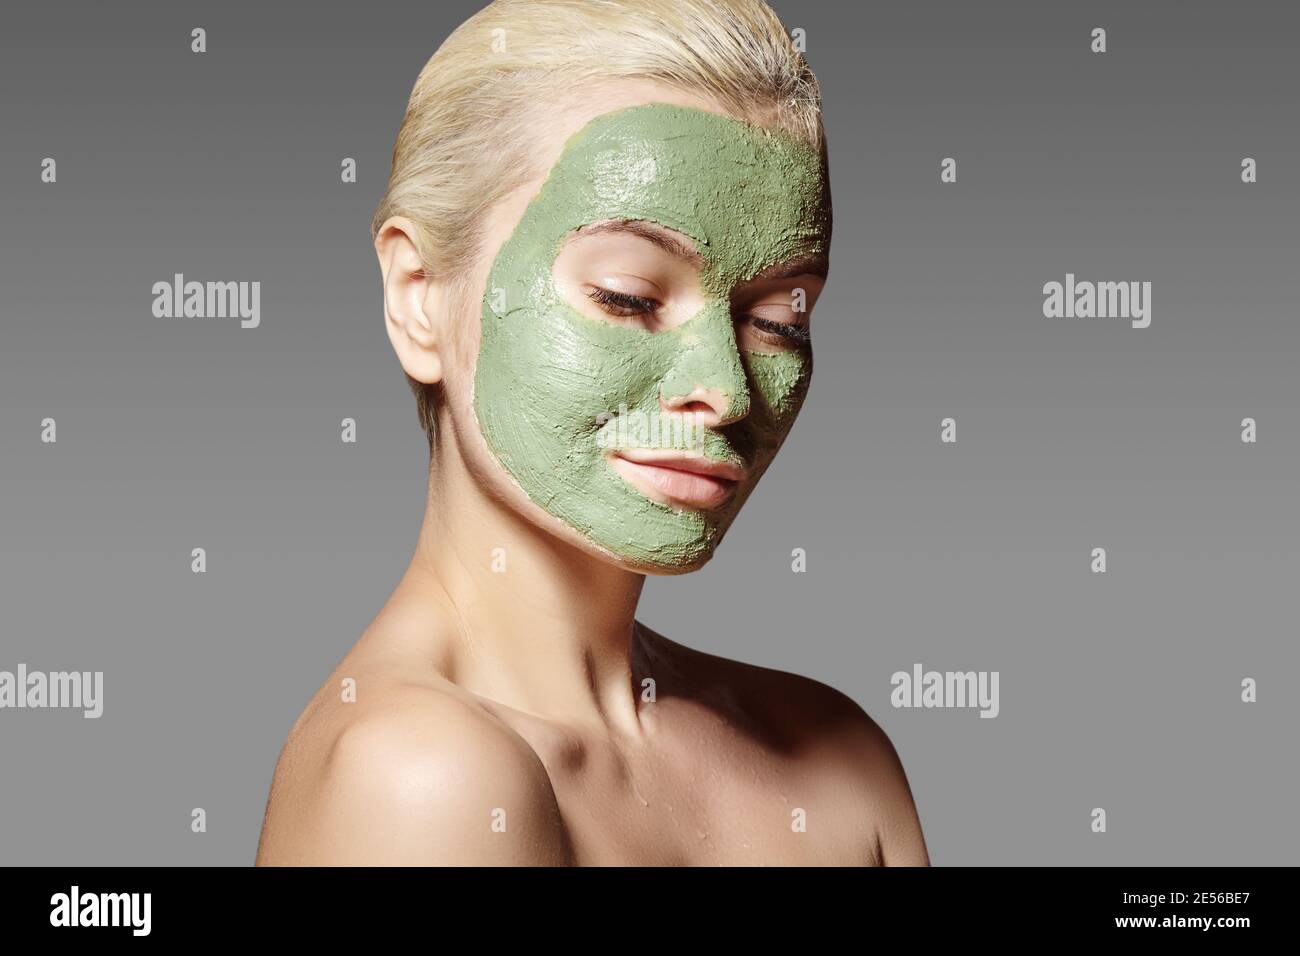 Beautiful Woman Applying Green Facial Mask. Beauty Treatments. Close-up Portrait of Spa Girl Apply Clay Facial mask on grey background. Stock Photo